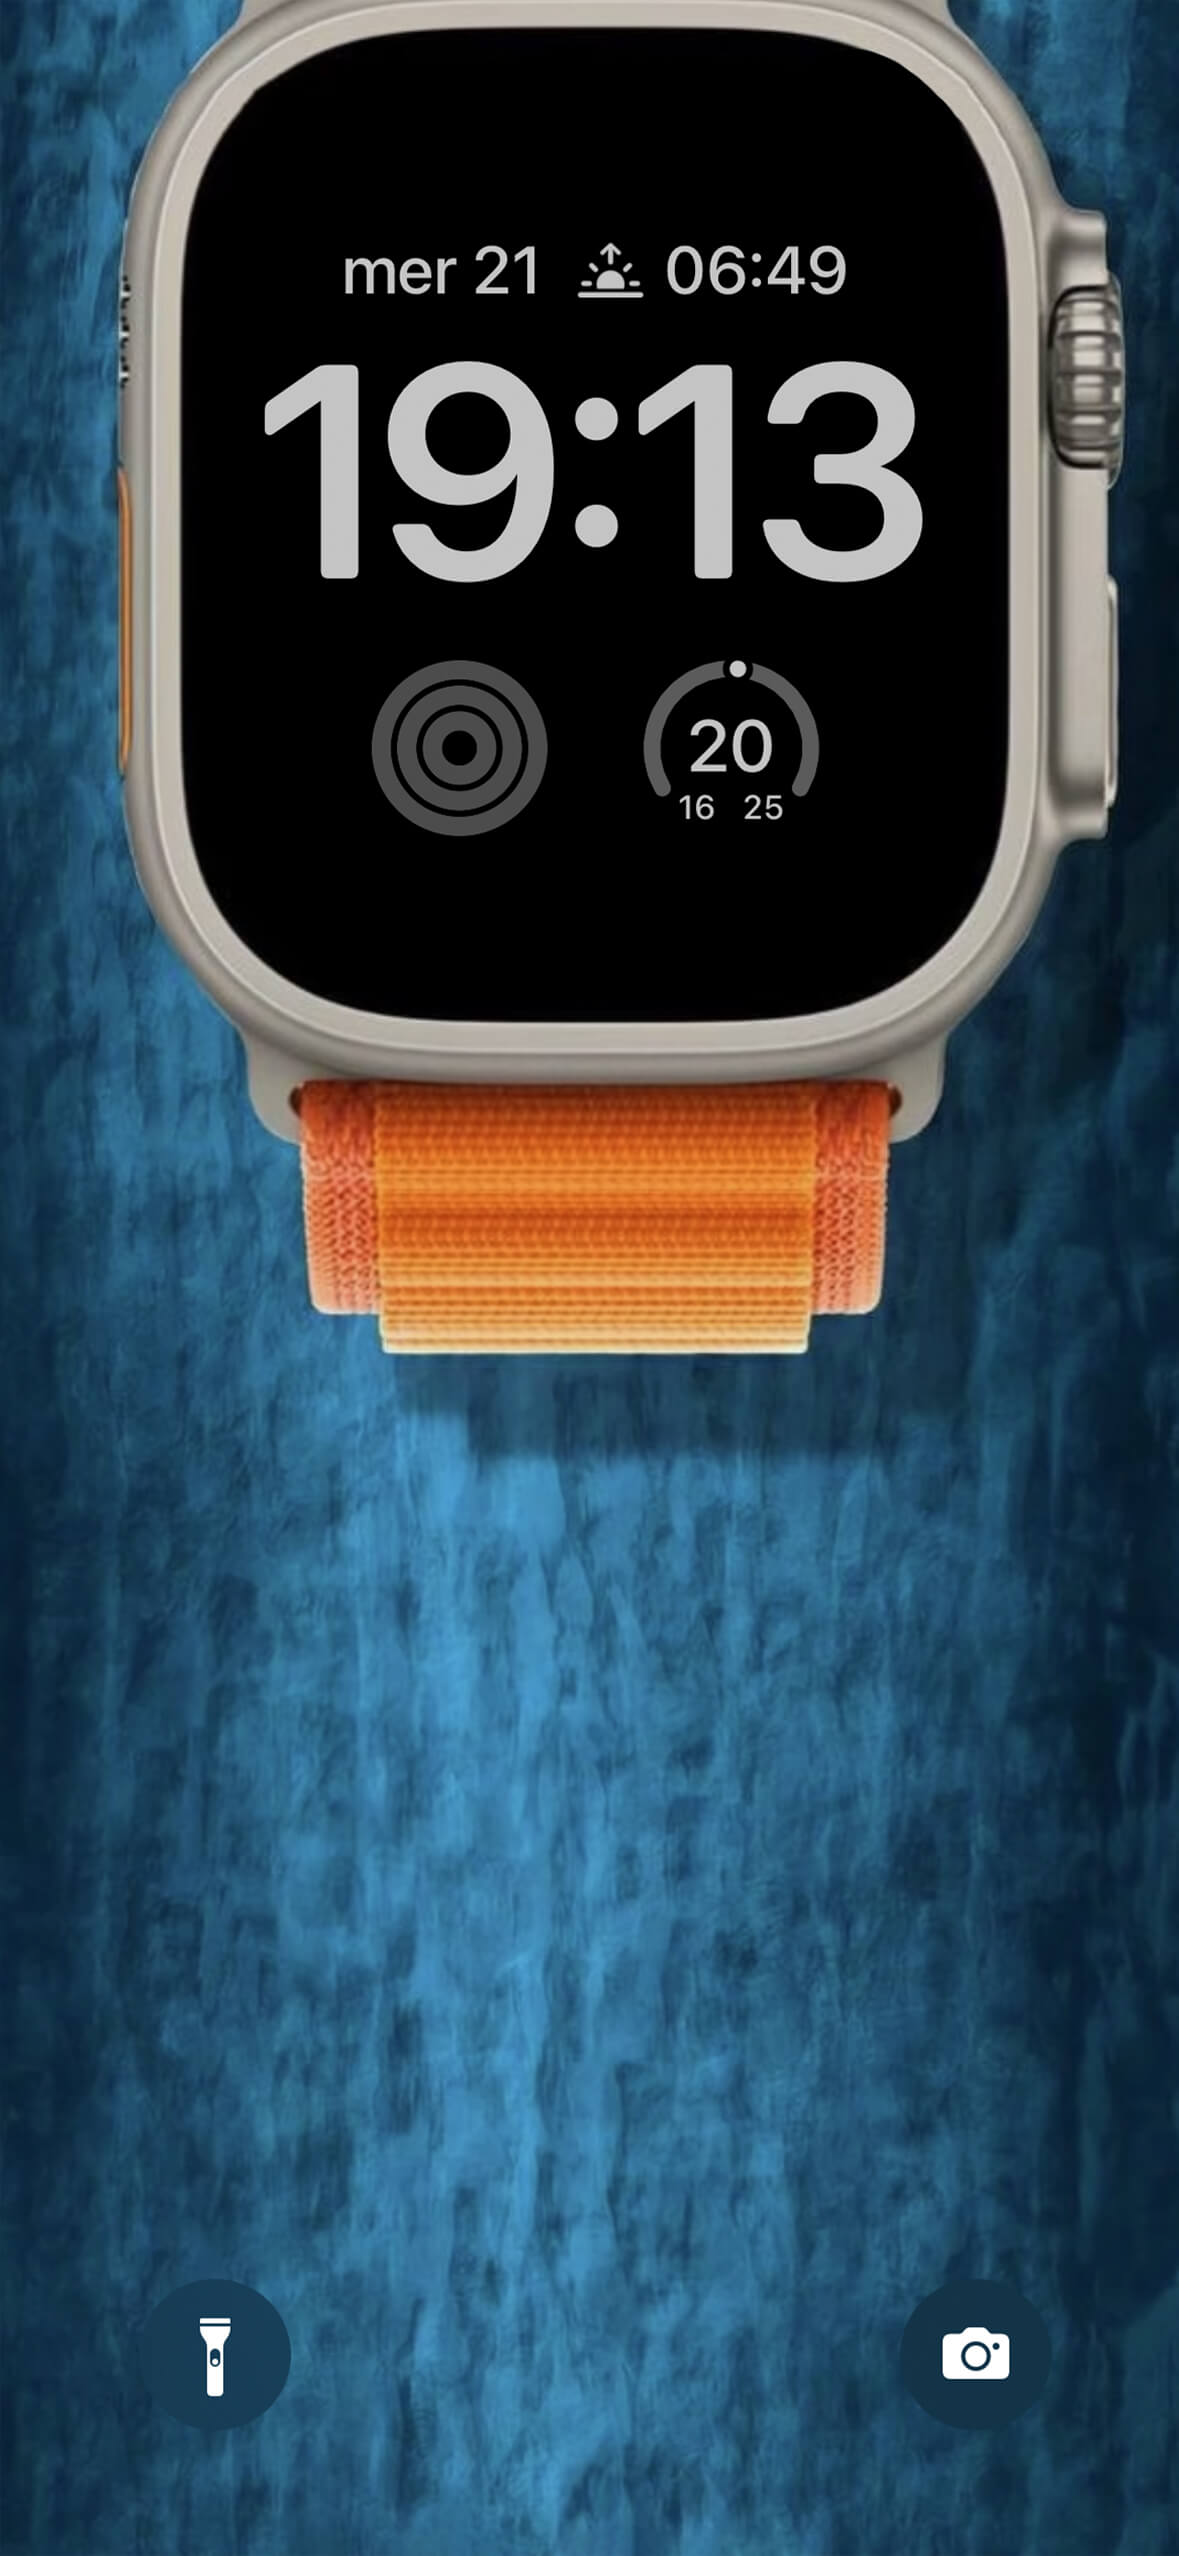 How can i put this wallpaper on an  watch series 7 nike this wallpaper was  seen on the watchs add  rAppleWatch